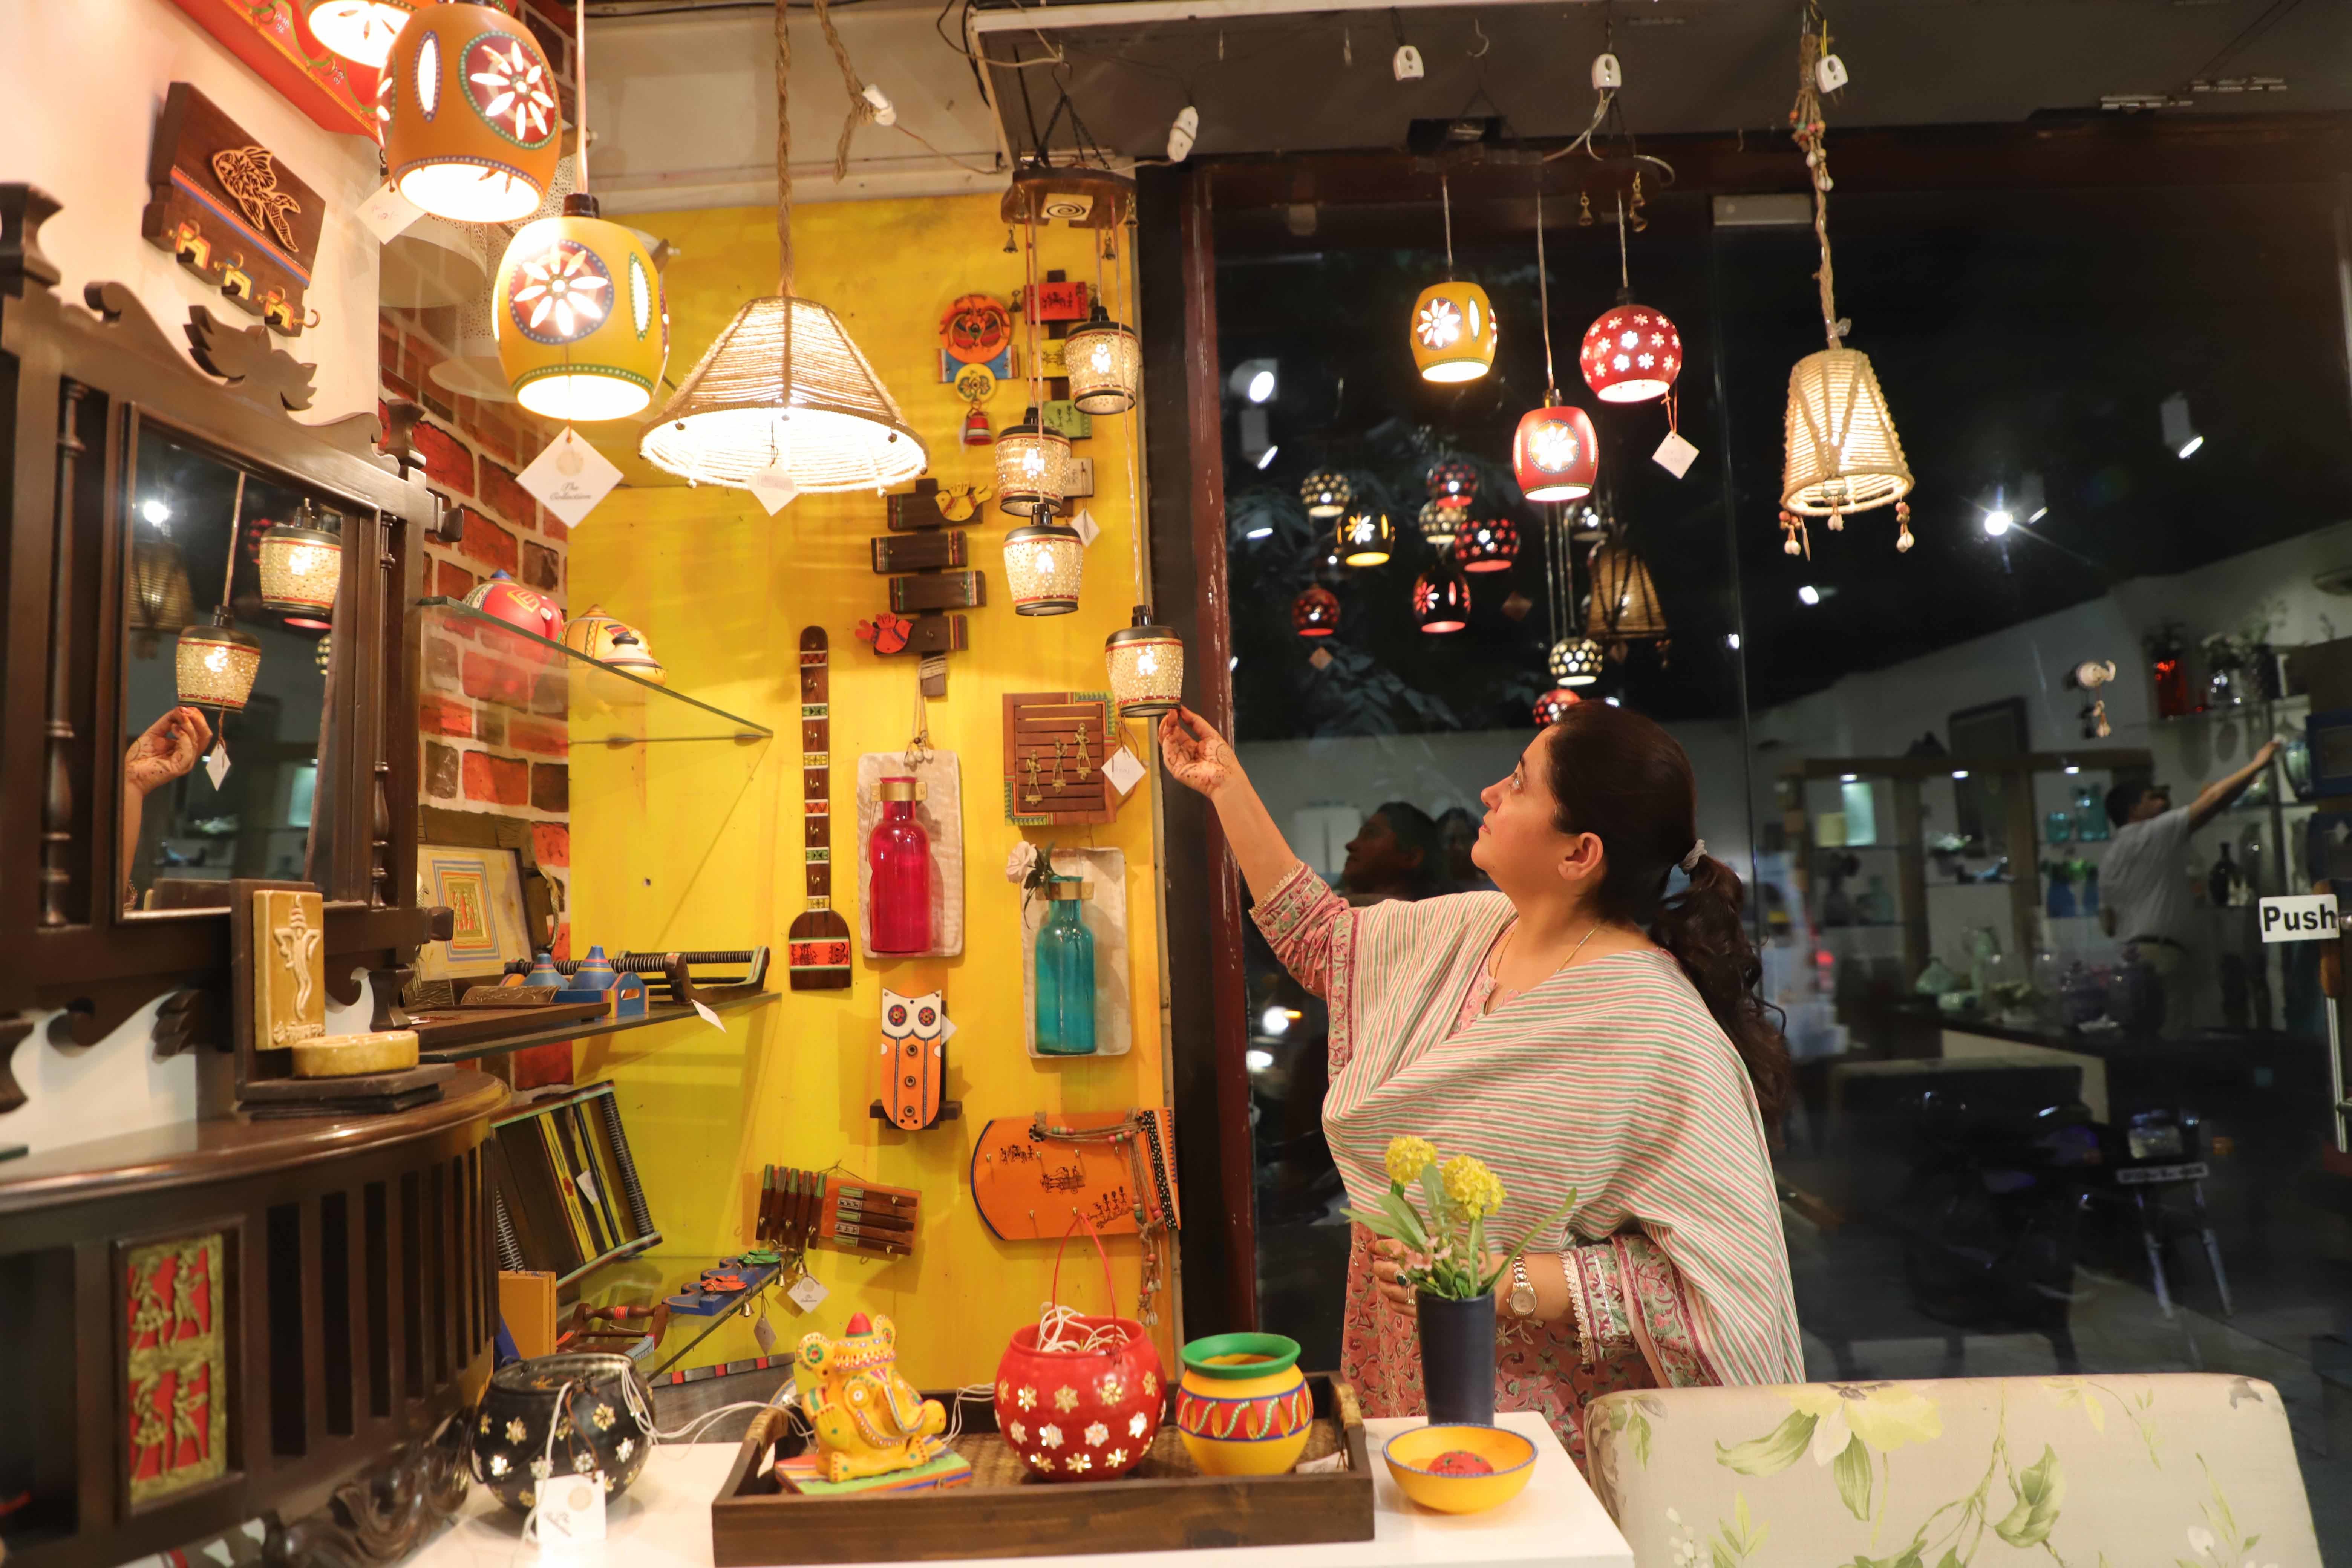 Beautiful handcrafted and hand-painted lights on display during festive season